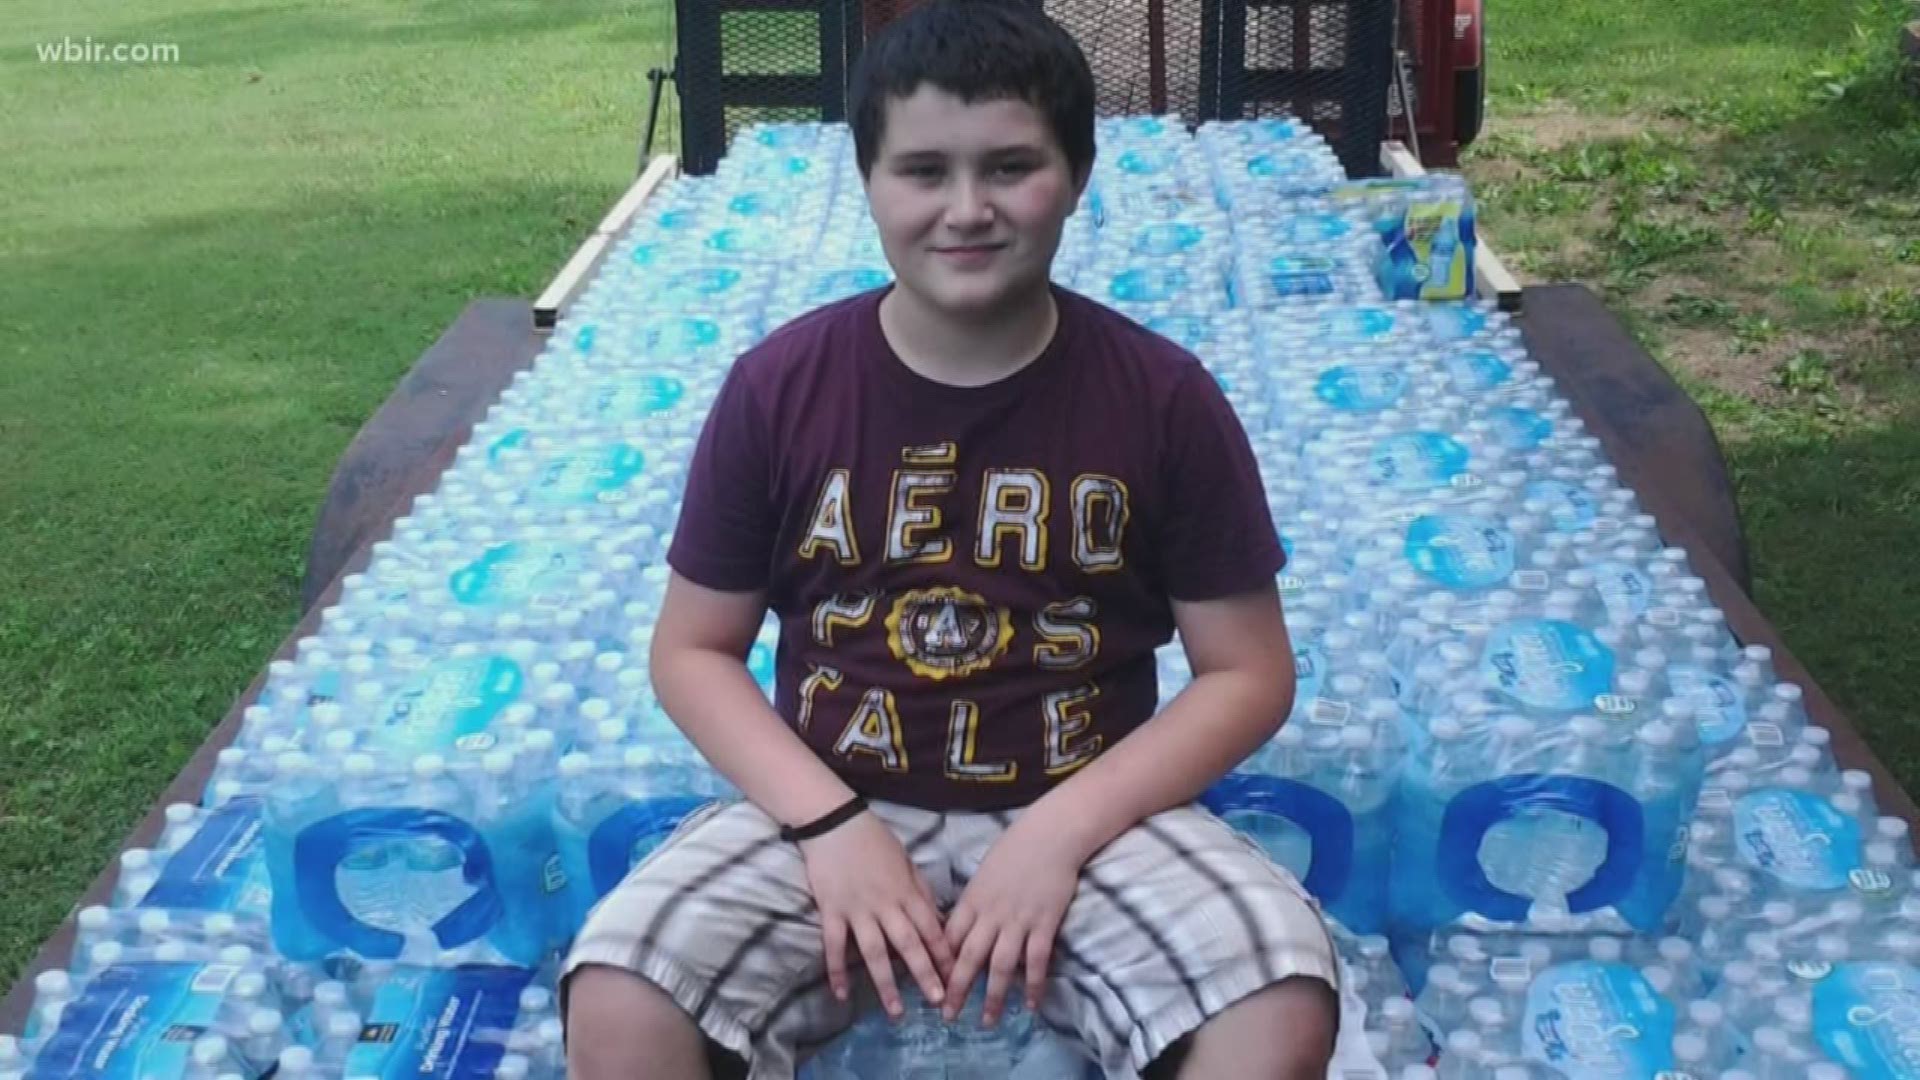 Nick Bryant collects water for Knoxville Area rescue Ministries.